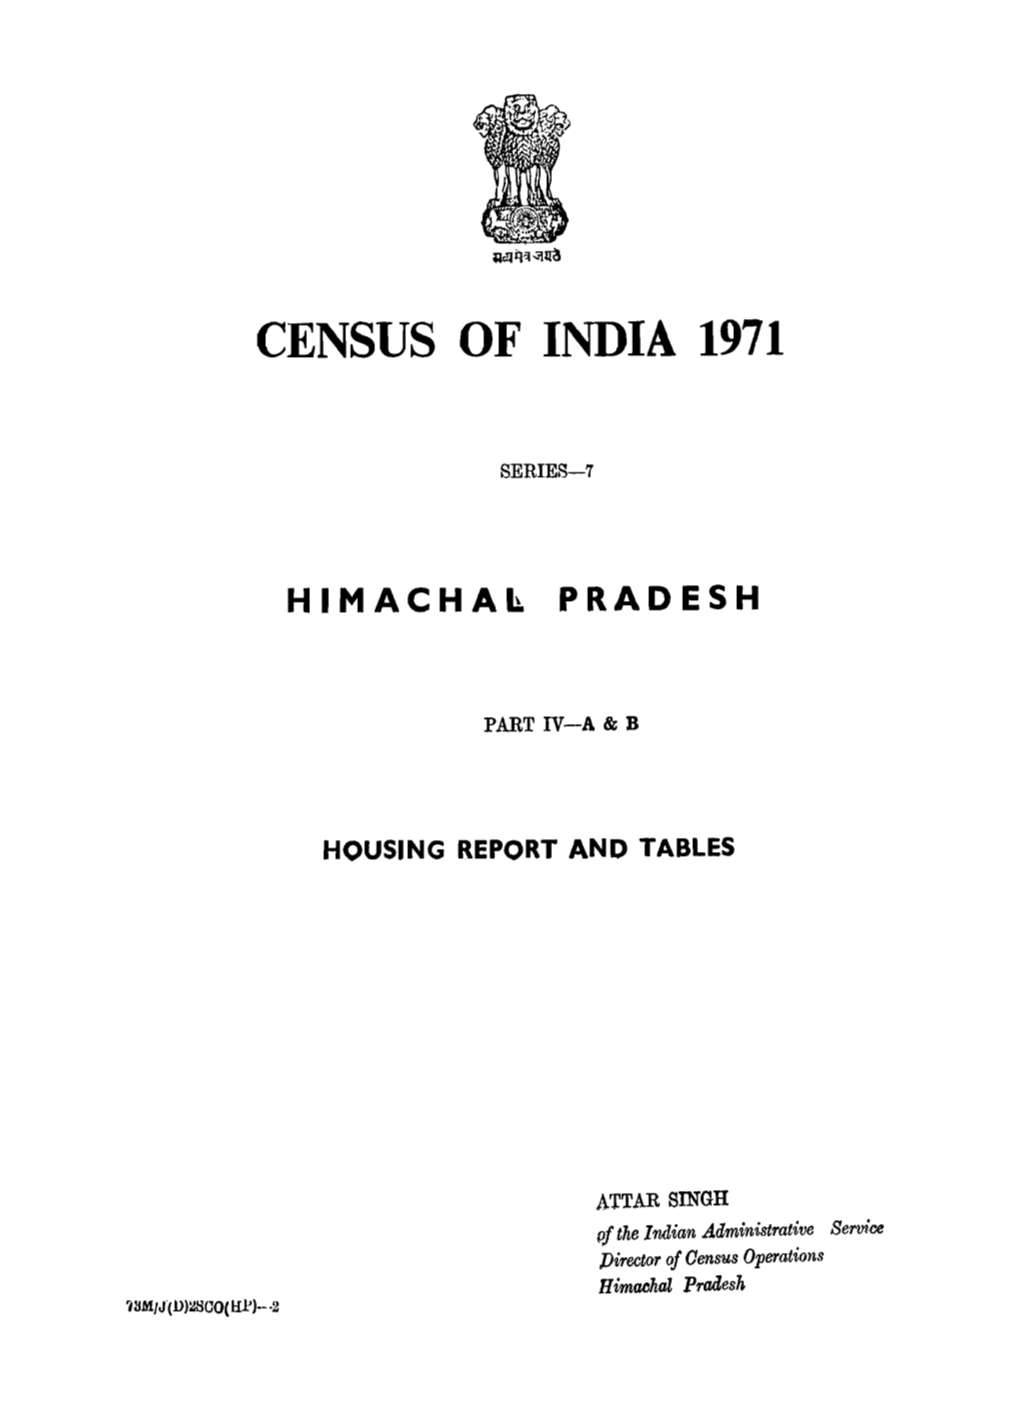 Housing Report and Tables, Part IV- a & B, Series-7, Himachal Pradesh